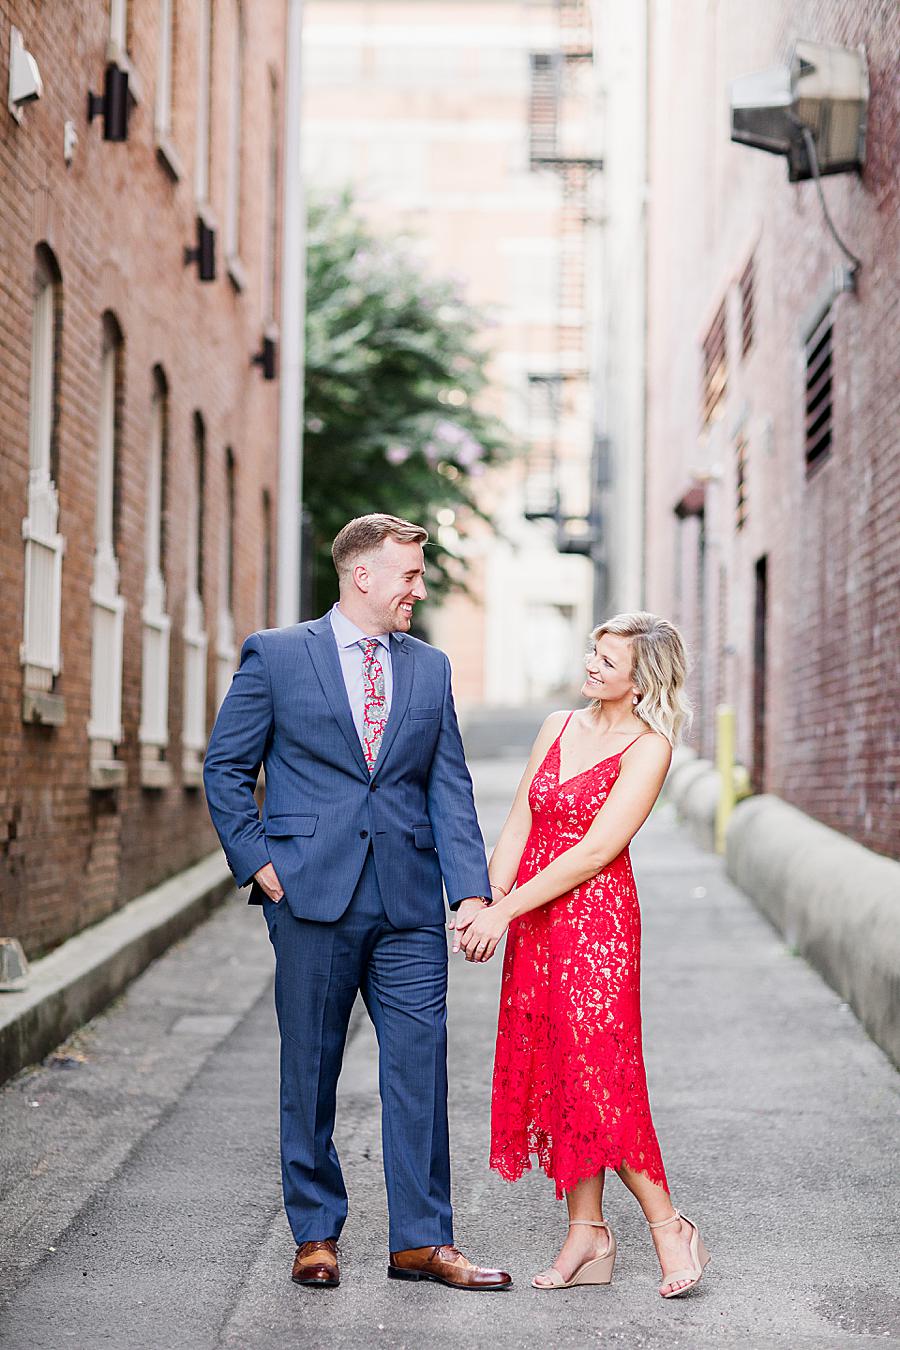 Holding hands at this Knoxville Botanical Gardens engagement by Knoxville Wedding Photographer, Amanda May Photos.